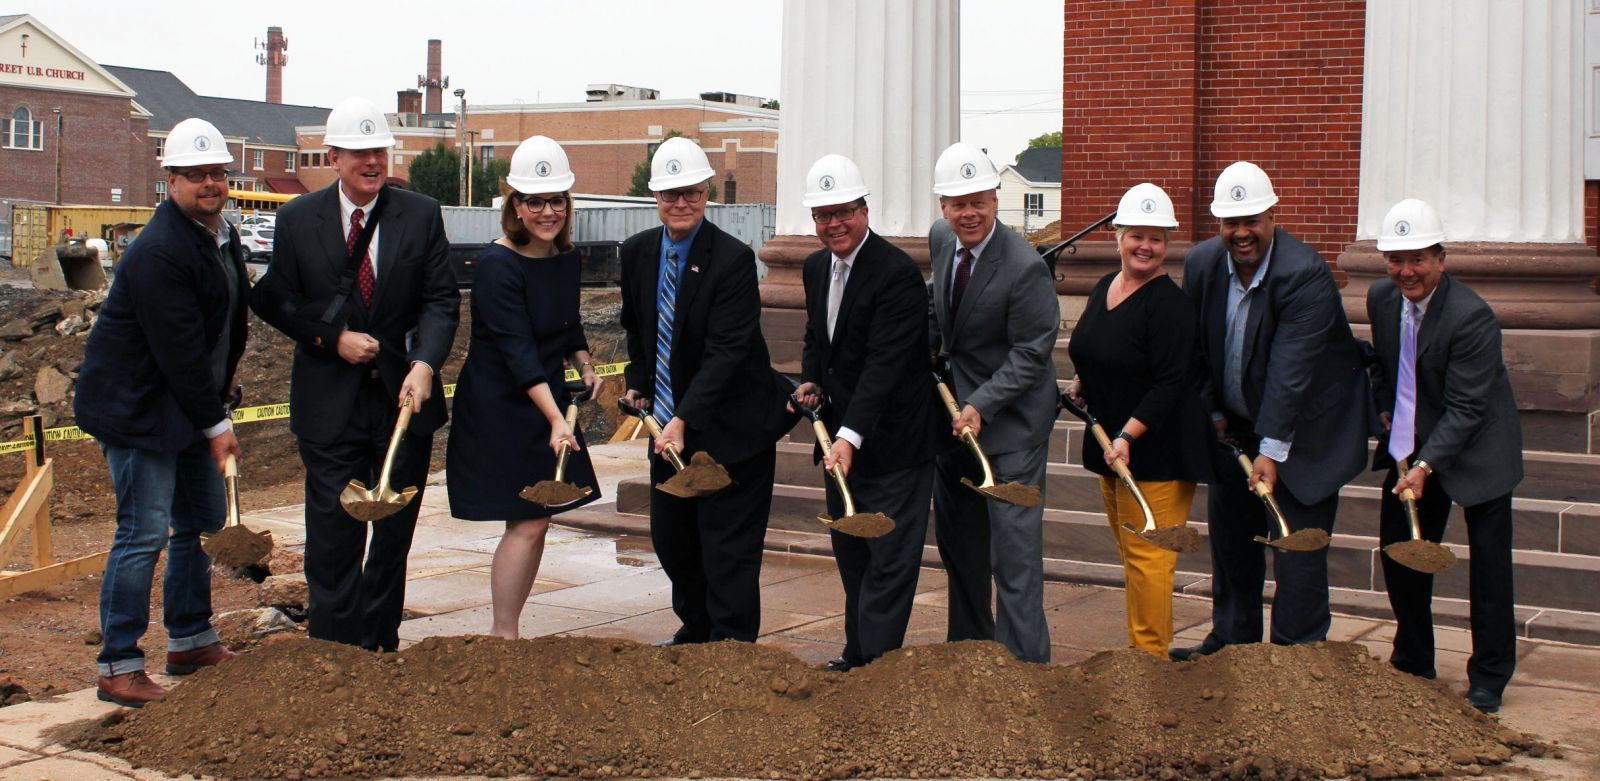 Left to right: Mark Miller, Downtown Business Council; Steve Christian, Greater Chambersburg Chamber of Commerce; Mary Beth Shank, County Solicitor; Bob Thomas, Commissioner; Dave Keller, Commissioner Chairman; Bob Ziobrowski, Commissioner; Carrie Gray, County Administrator; John Wetzel, Pennsylvania Secretary of Corrections; Mike Ross, Franklin County Area Development Corporation